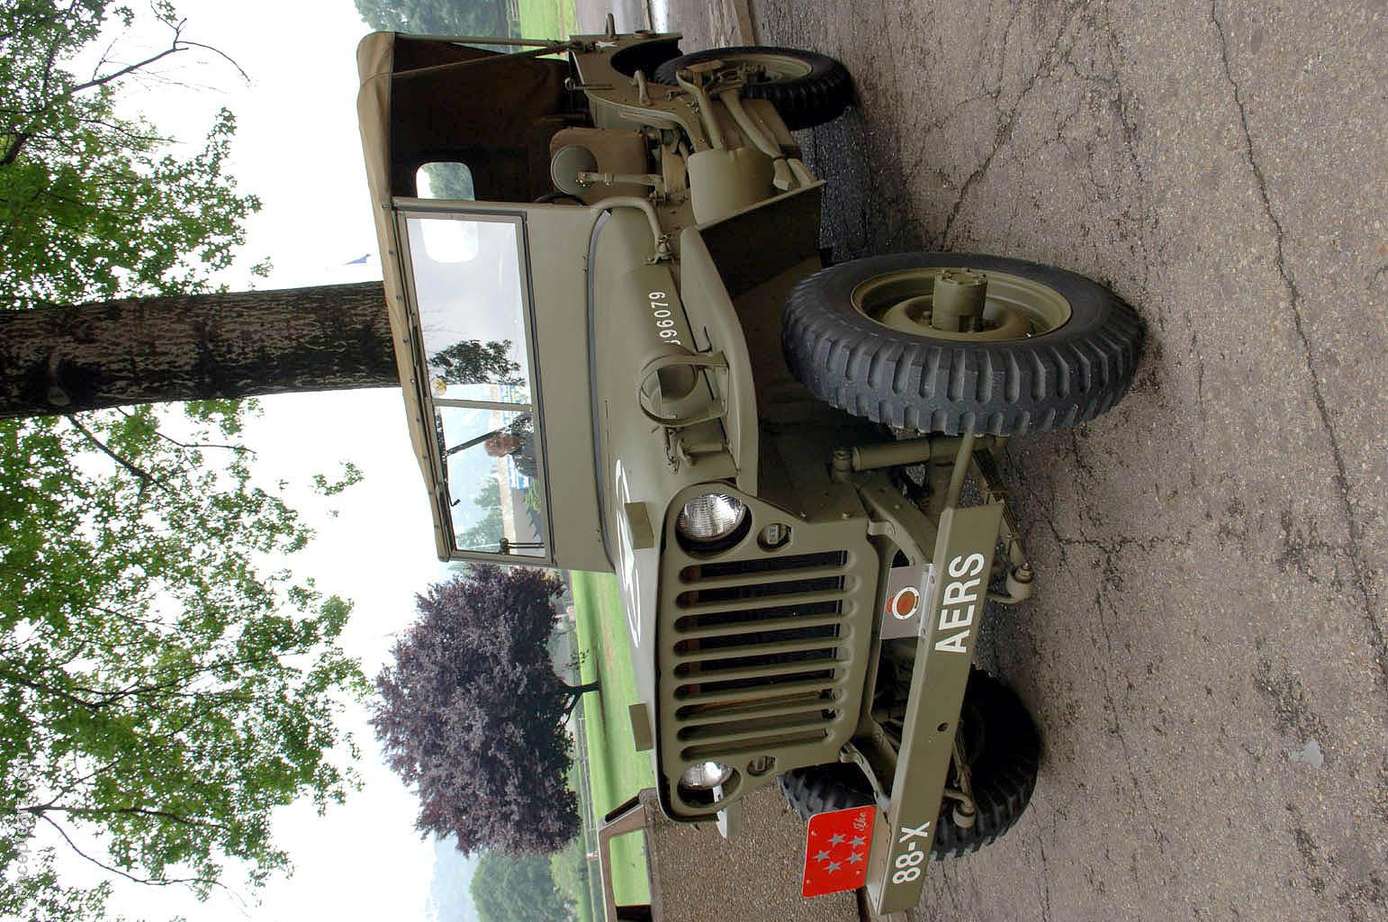 Willys_Jeep